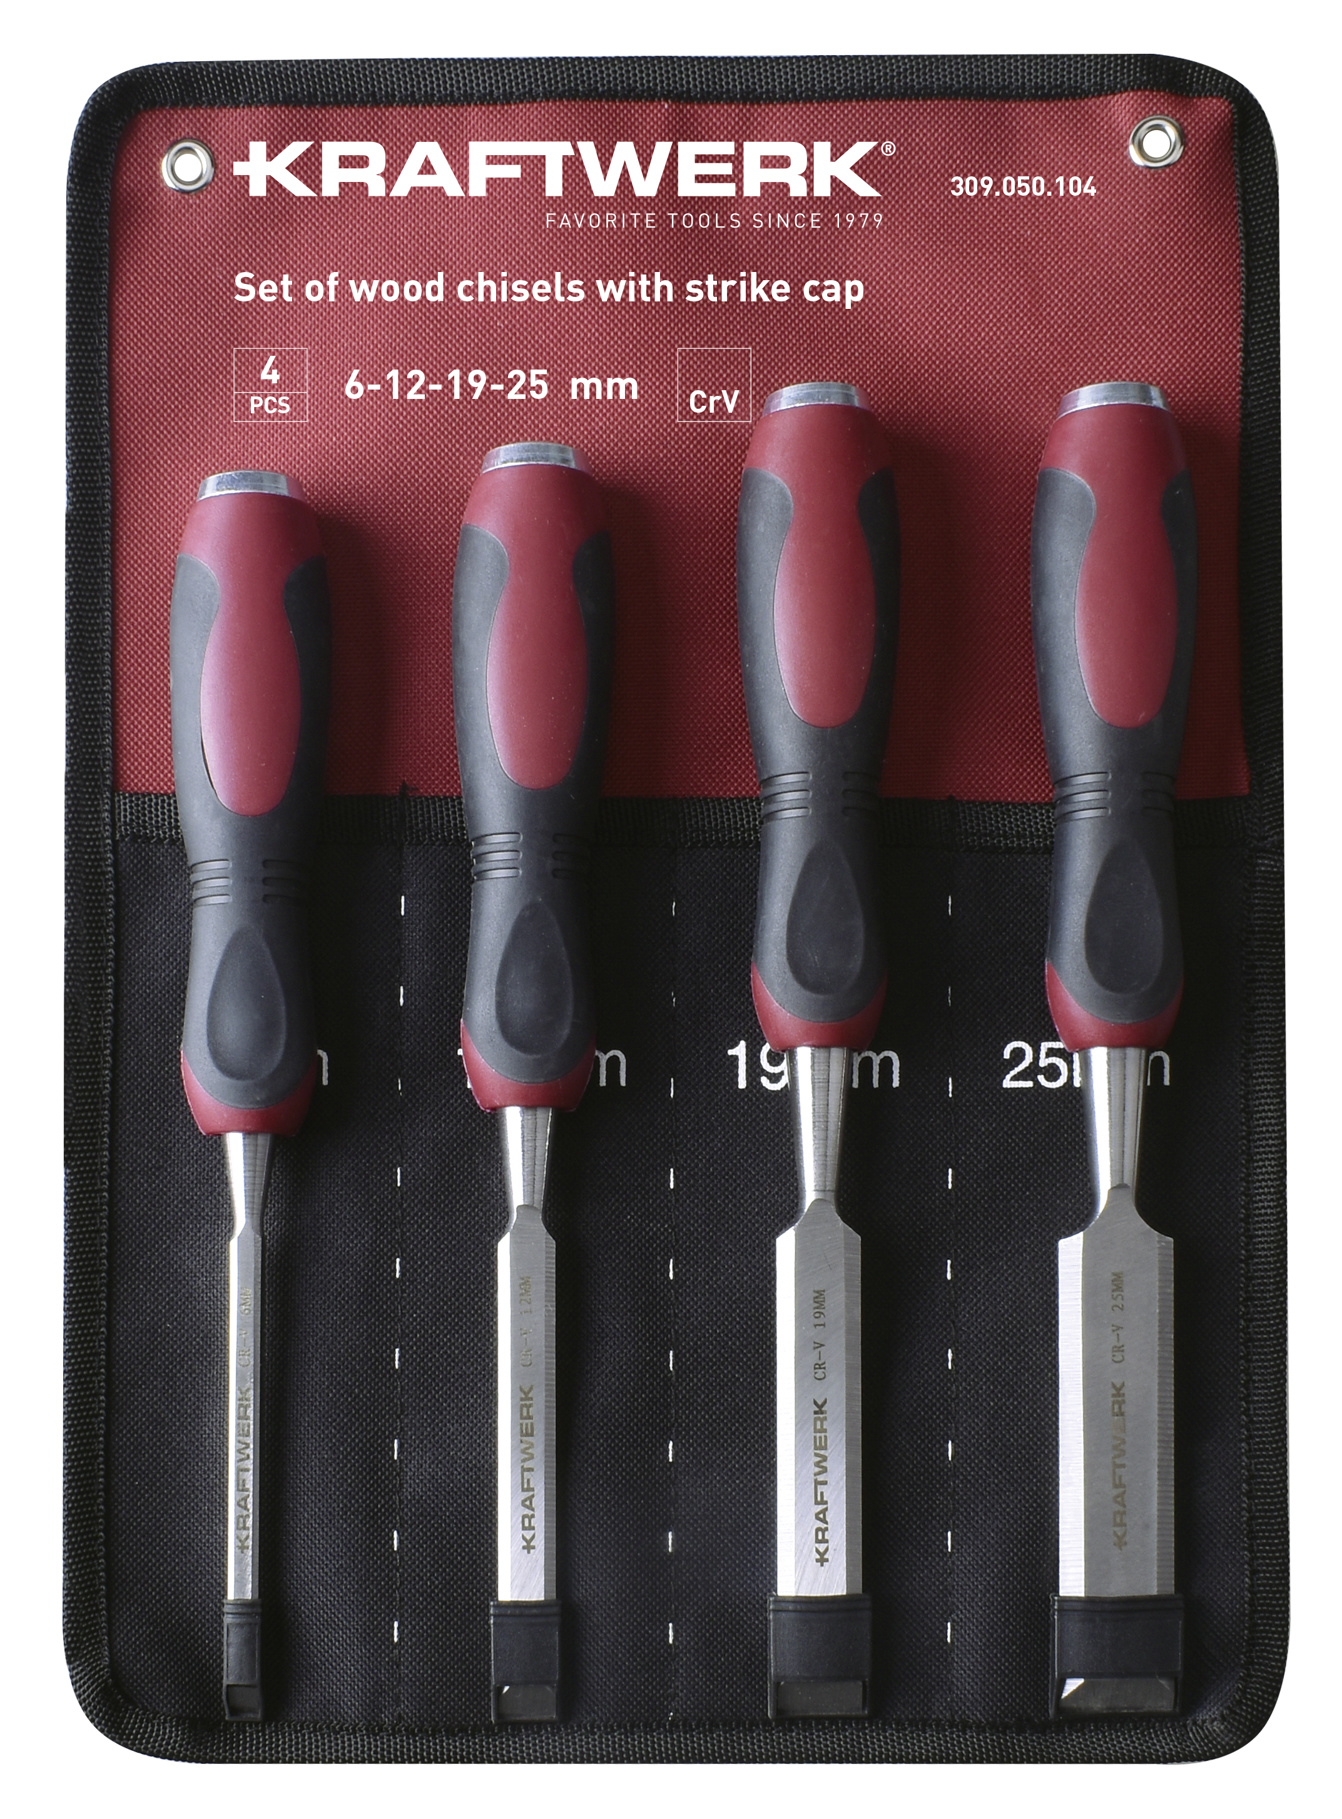 Set of wood chisels with strike cap, 6-12-19-25 mm